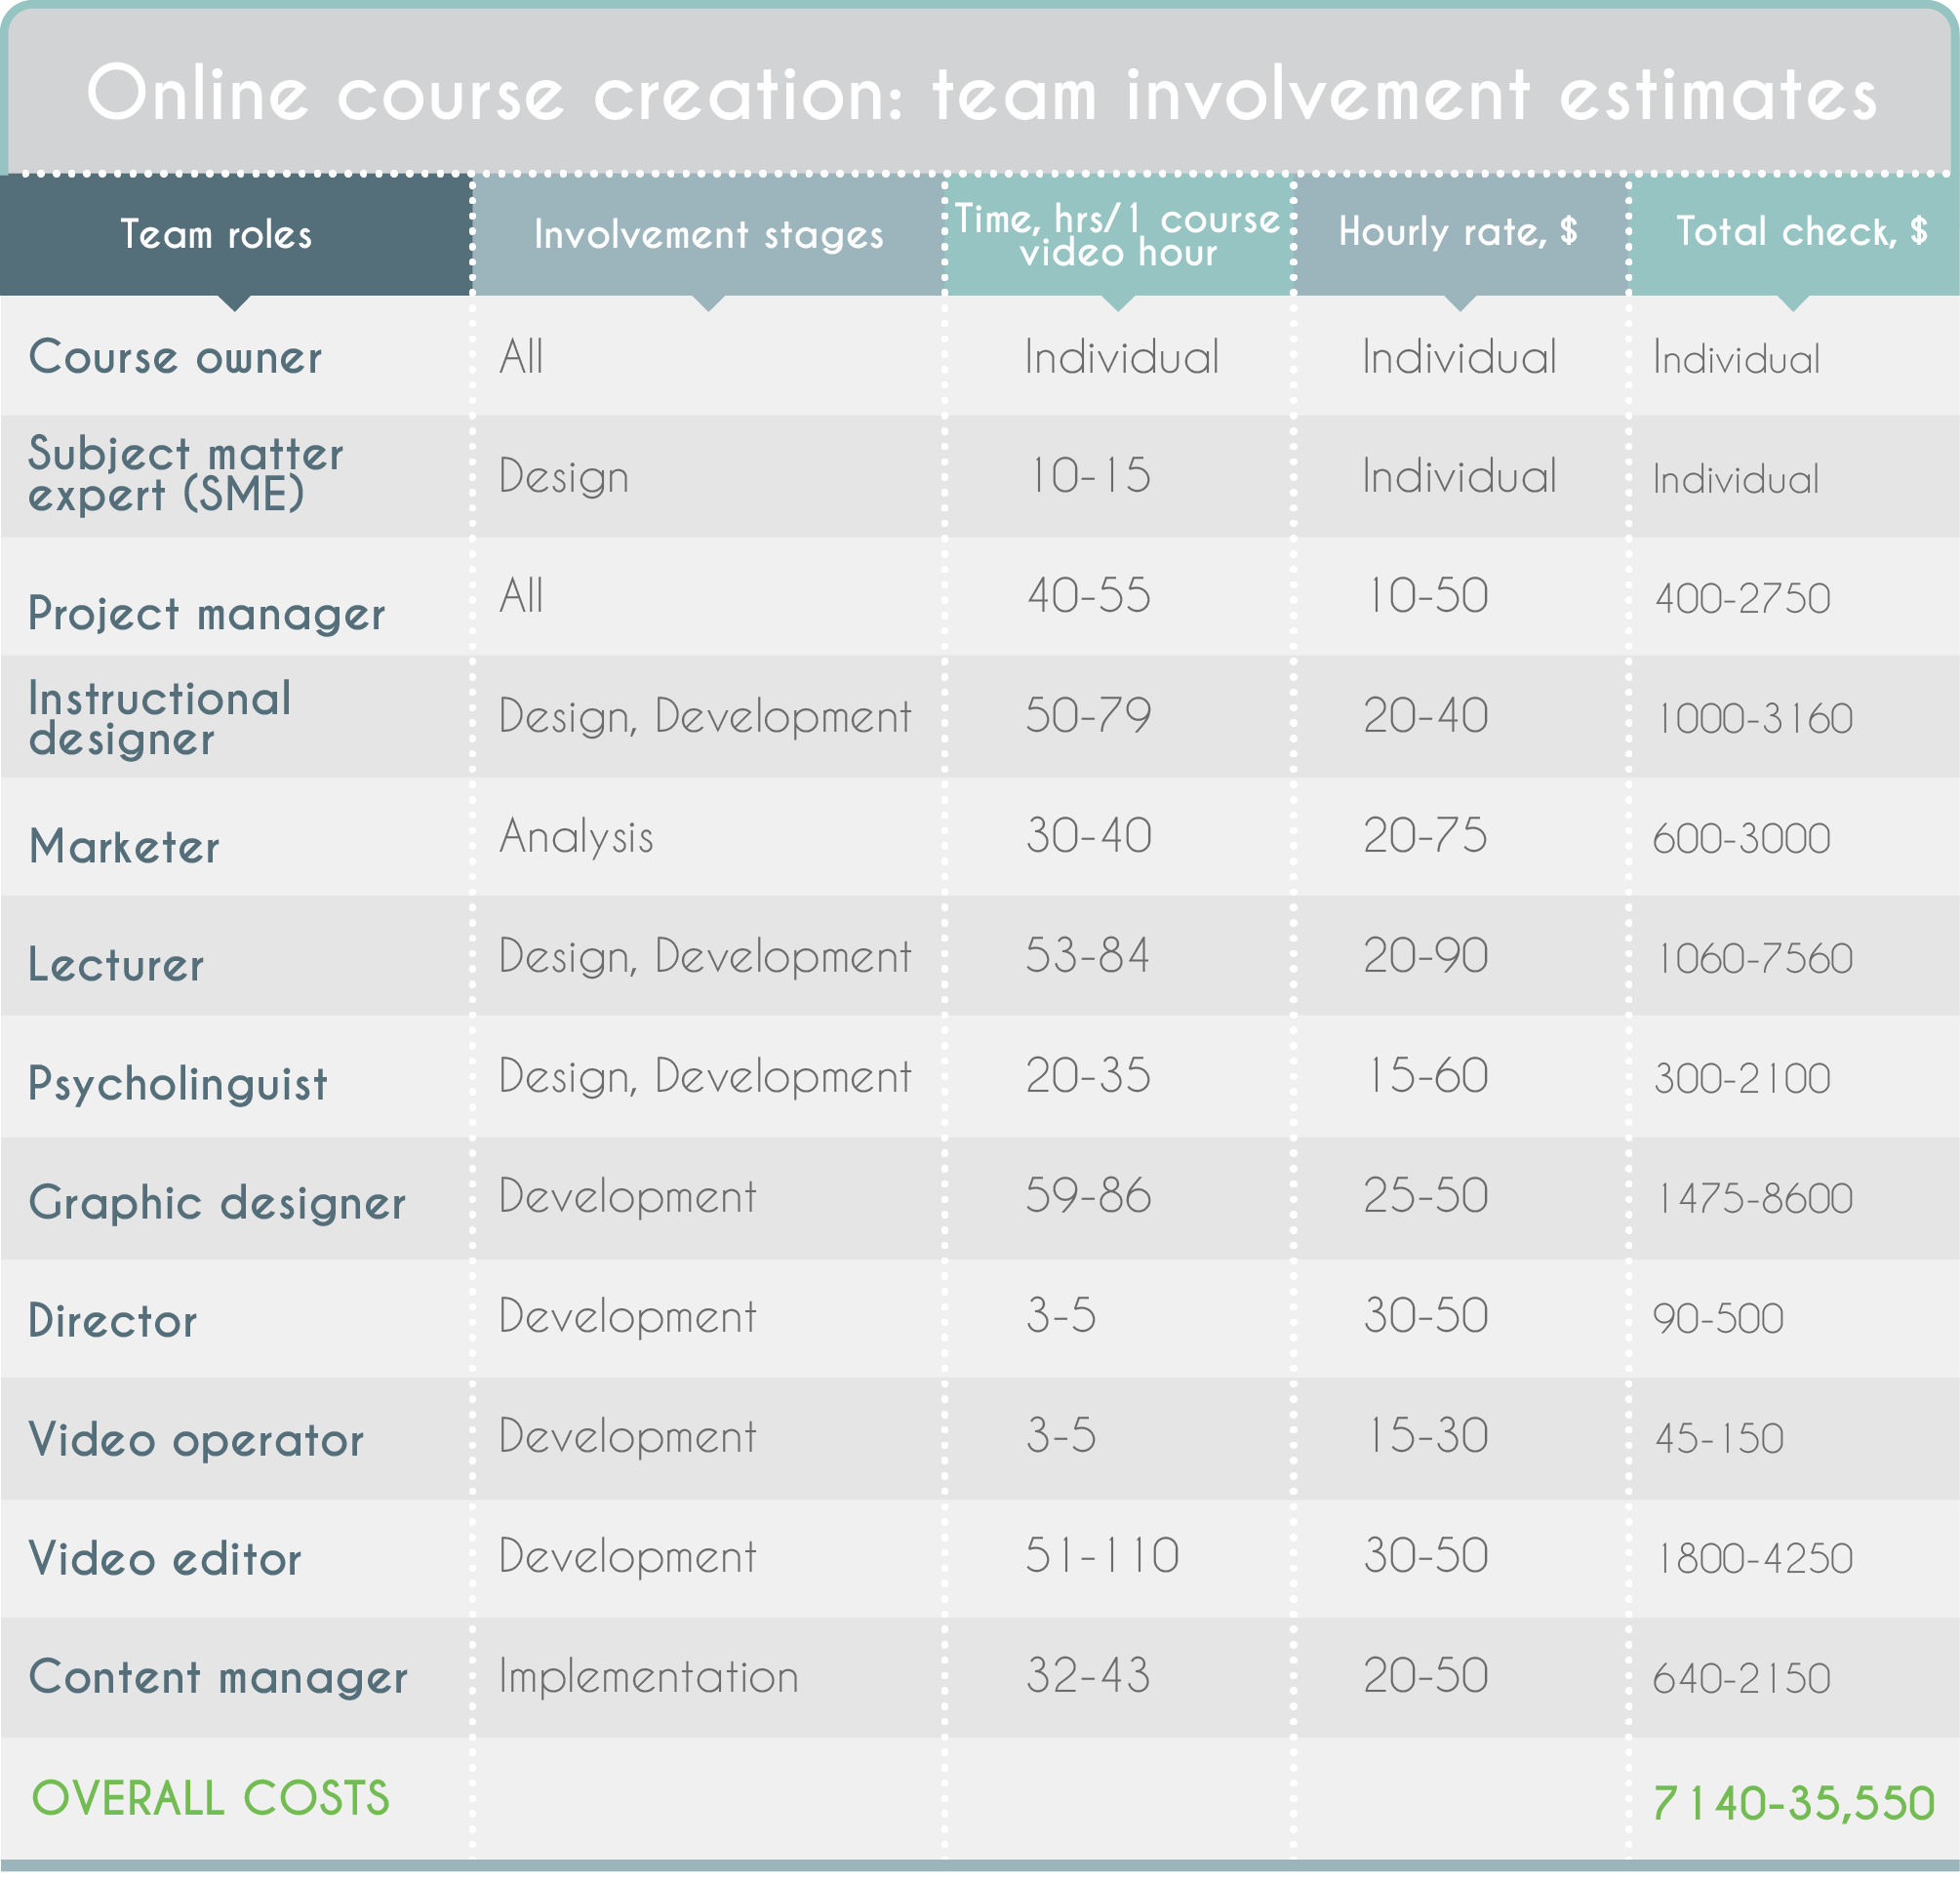 Online Course Creation Costs and Estimates Calculation